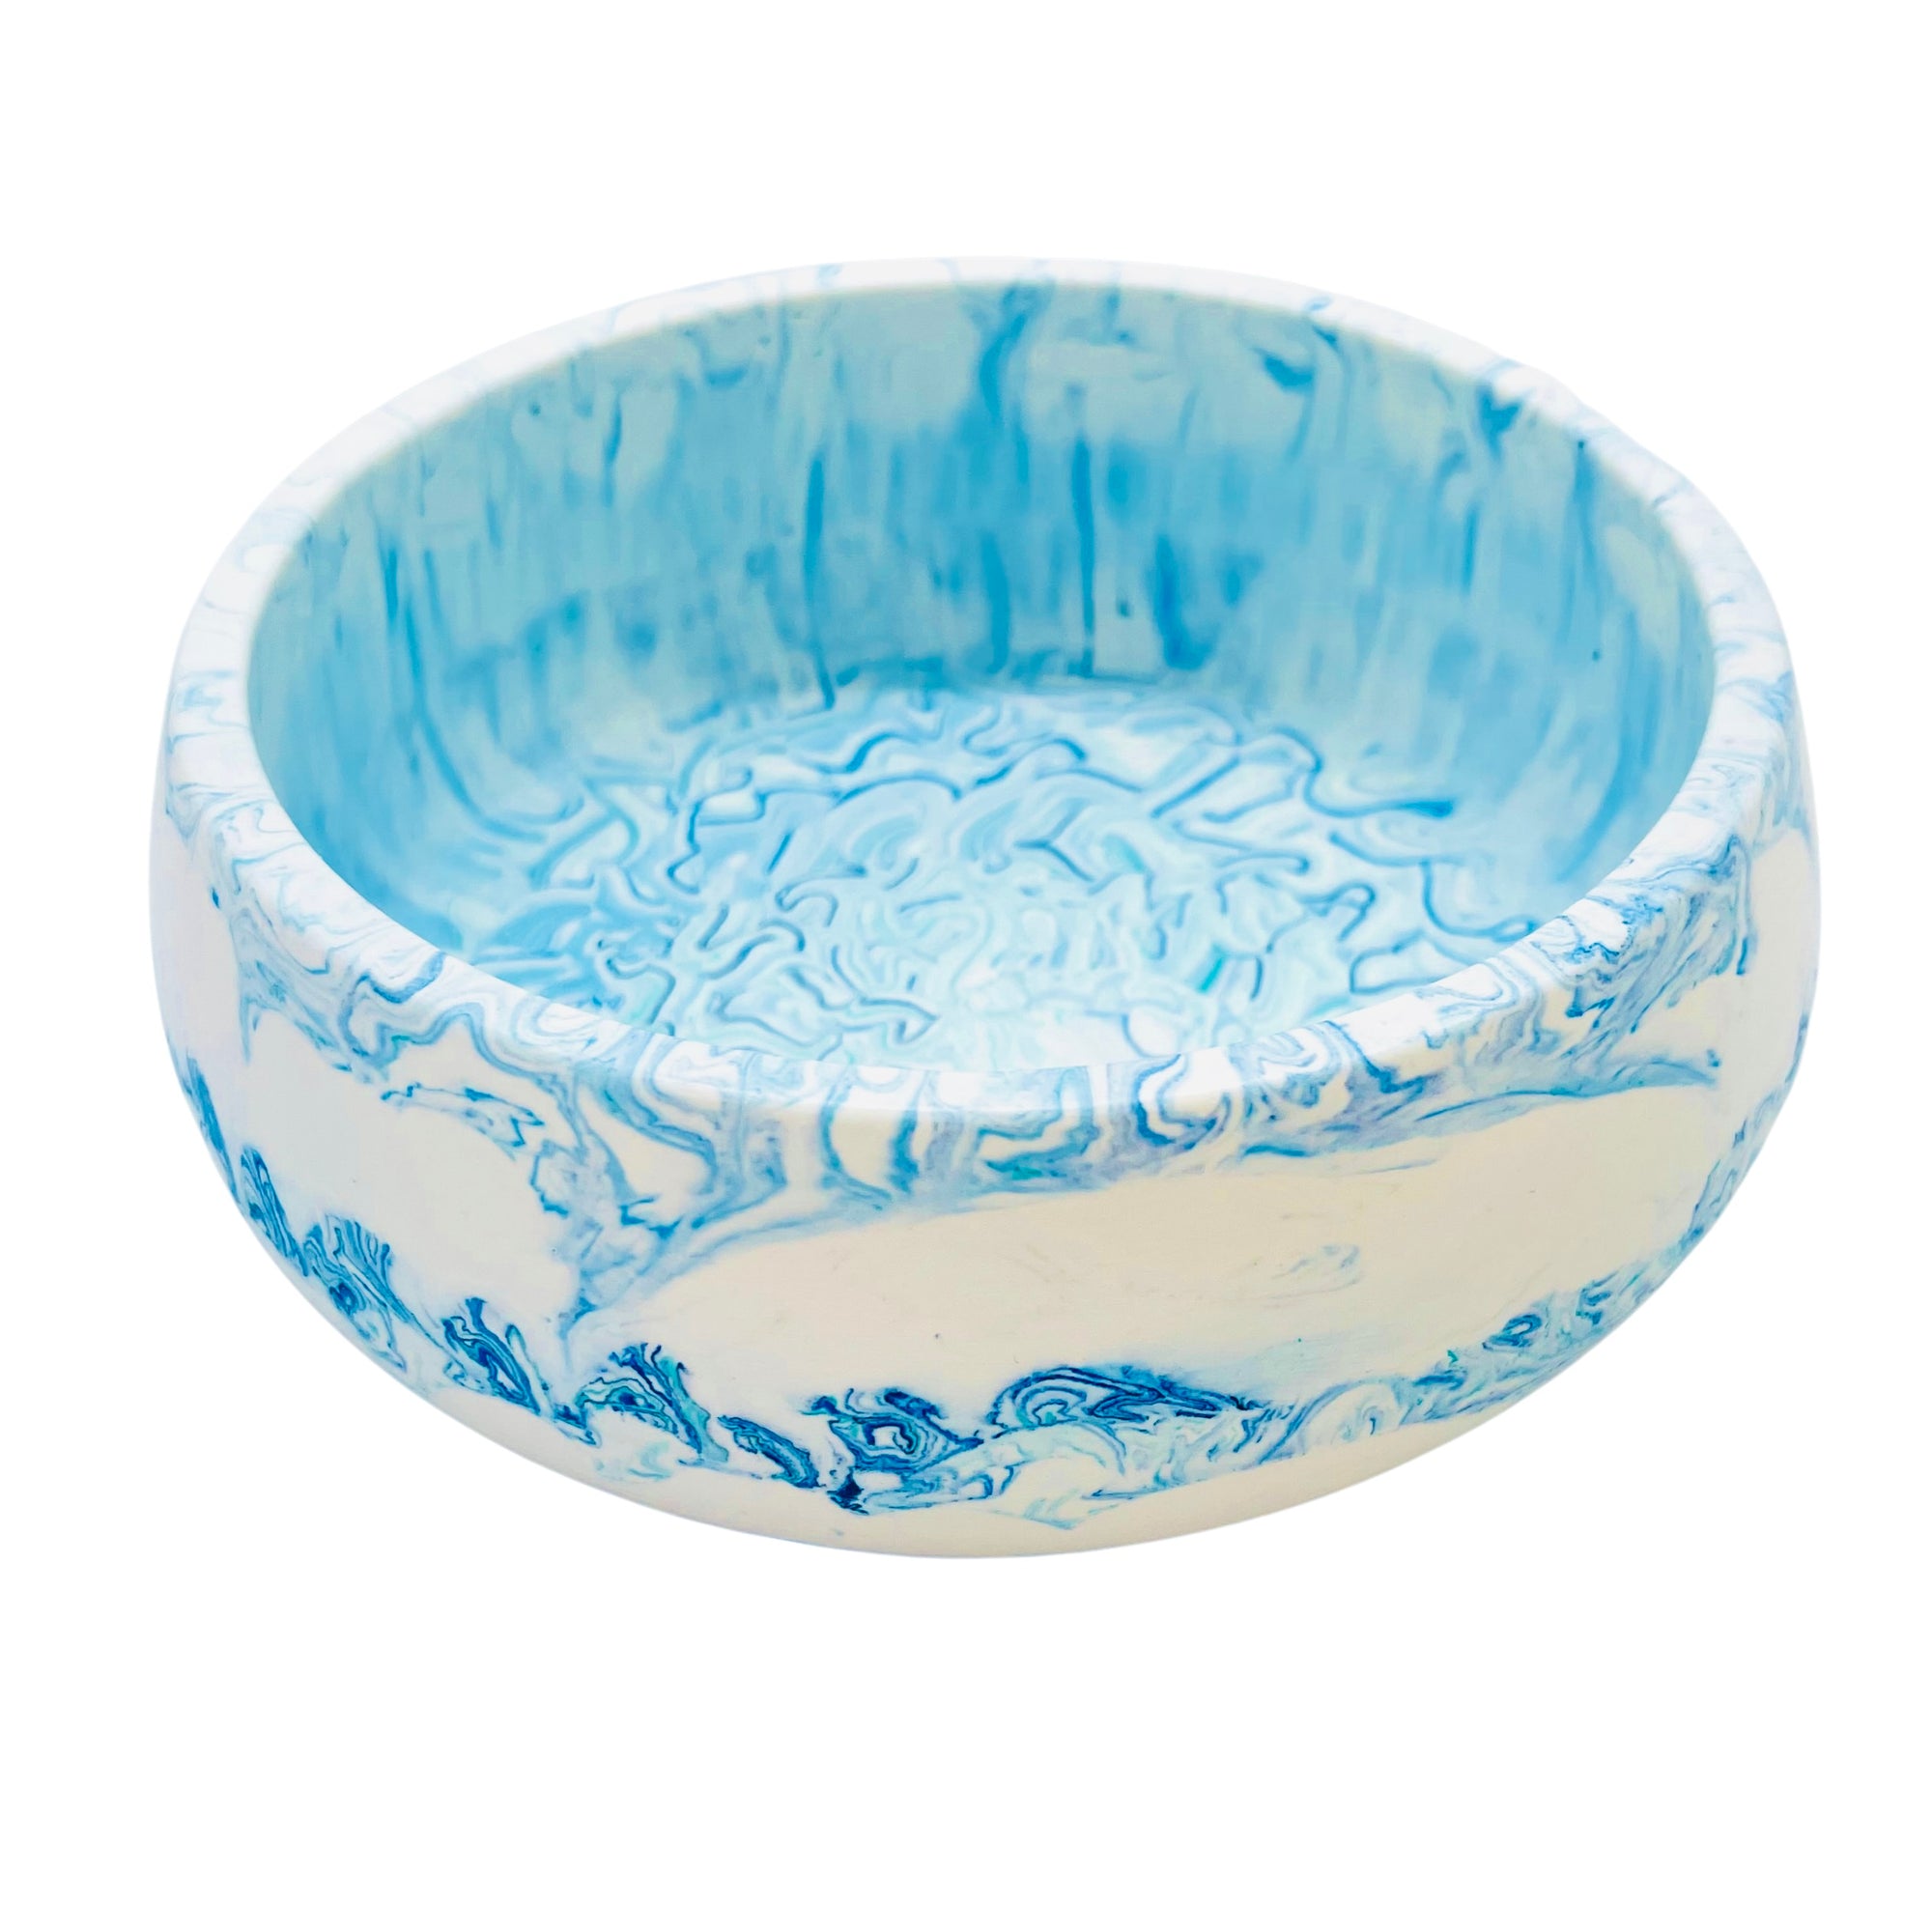 This eco-friendly Jesmonite bowl measures 15cm in diameter and is marbled with baby blue and turquoise pigment.